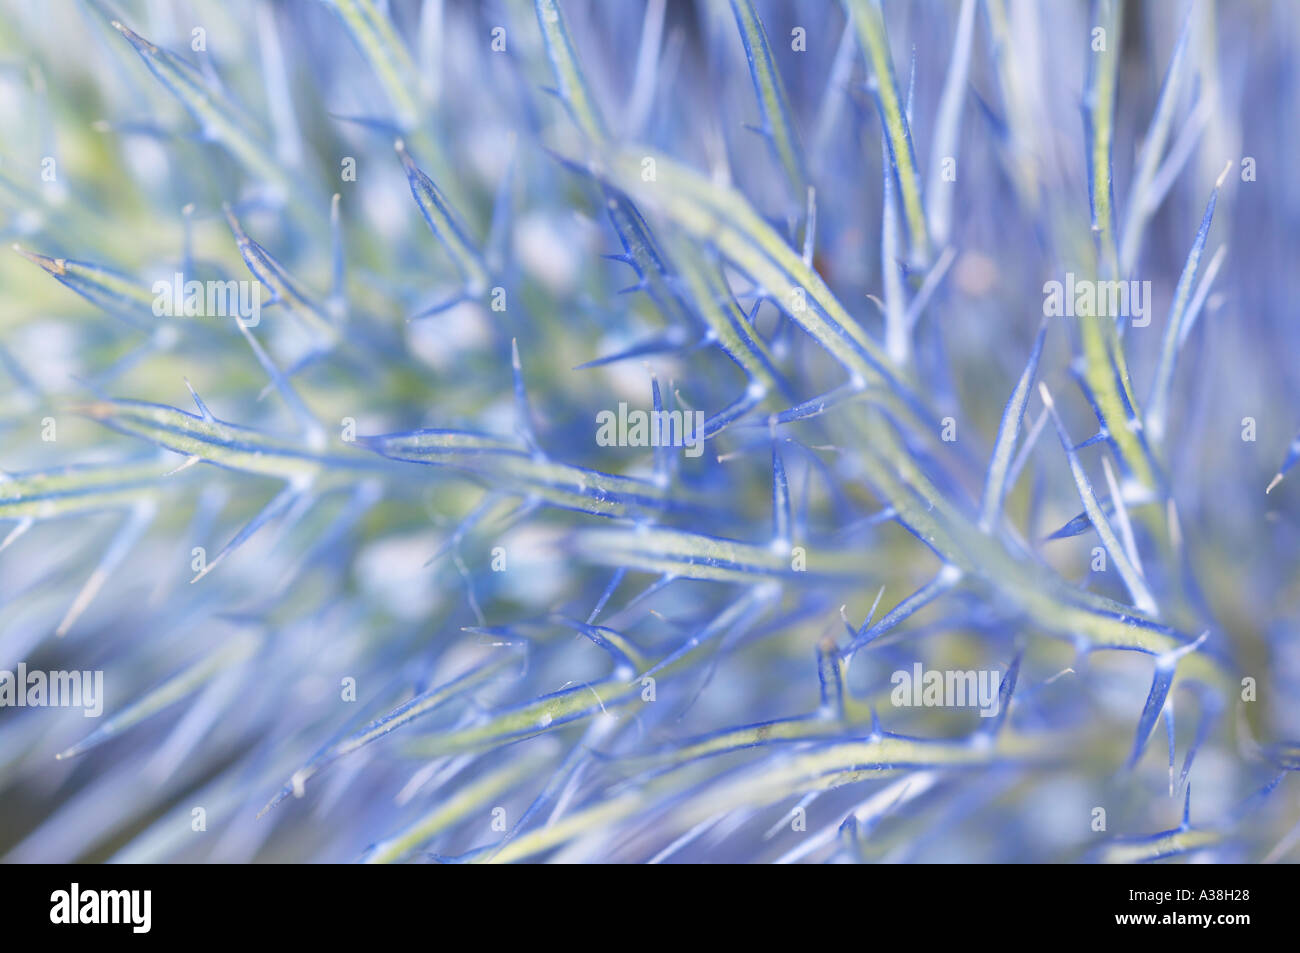 England,UK. Extreme closeup view of a Sea Holly flower head Stock Photo